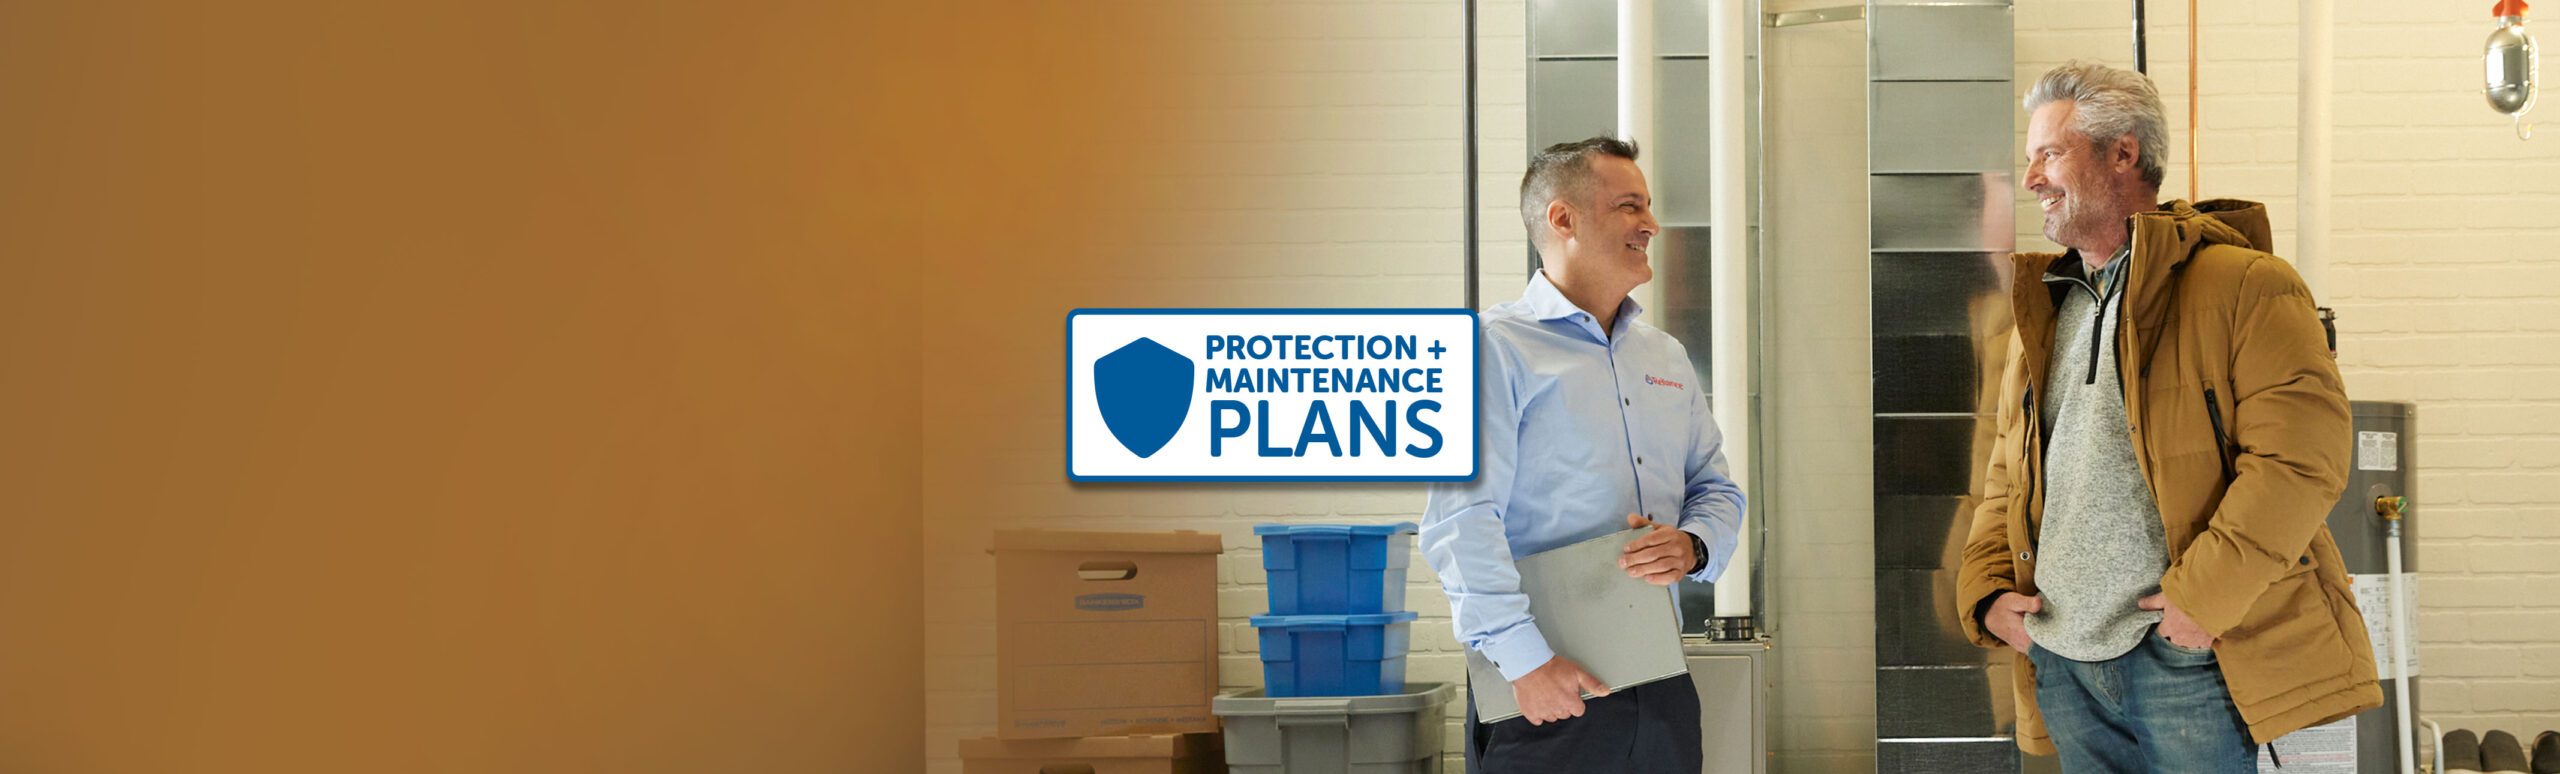 Protection + Maintenance Plans with reliance home comfort advisor and homeowner